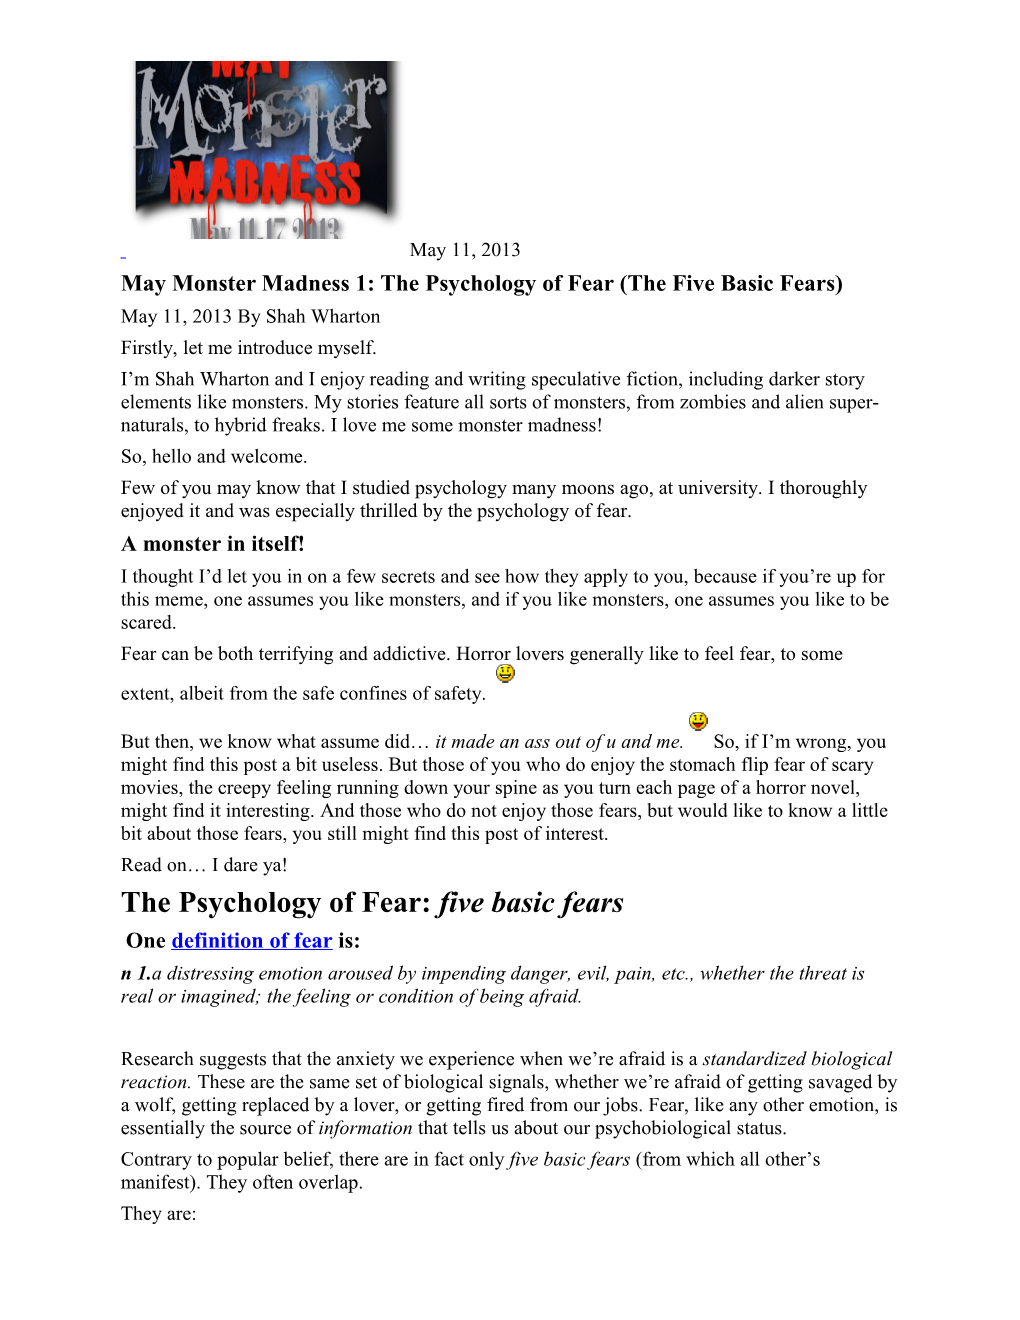 May Monster Madness 1: the Psychology of Fear (The Five Basic Fears)